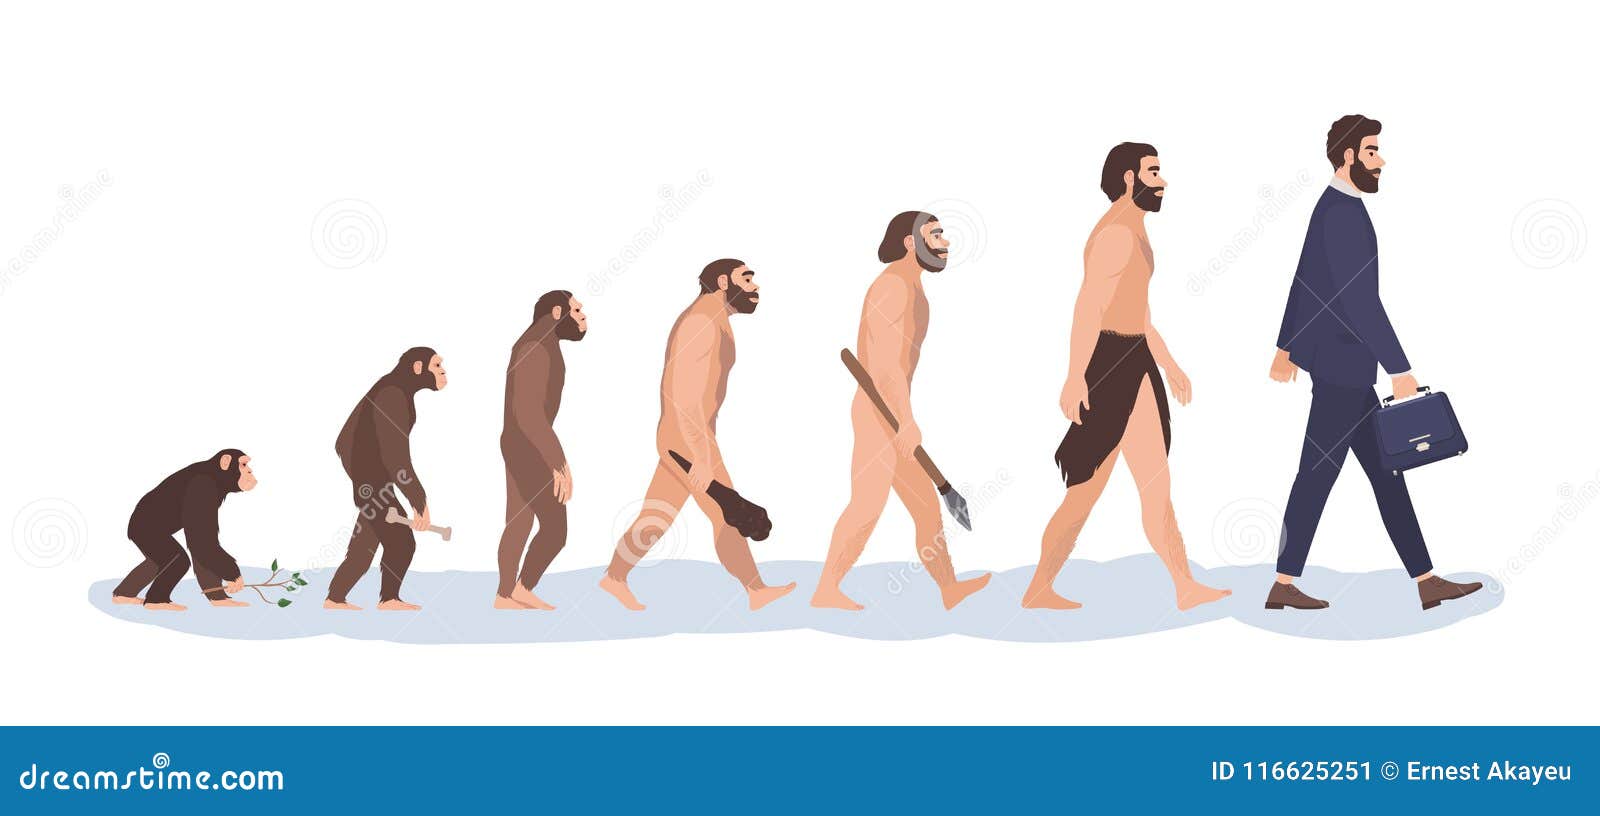 human evolution stages. evolutionary process and gradual development visualization from monkey or primate to businessman